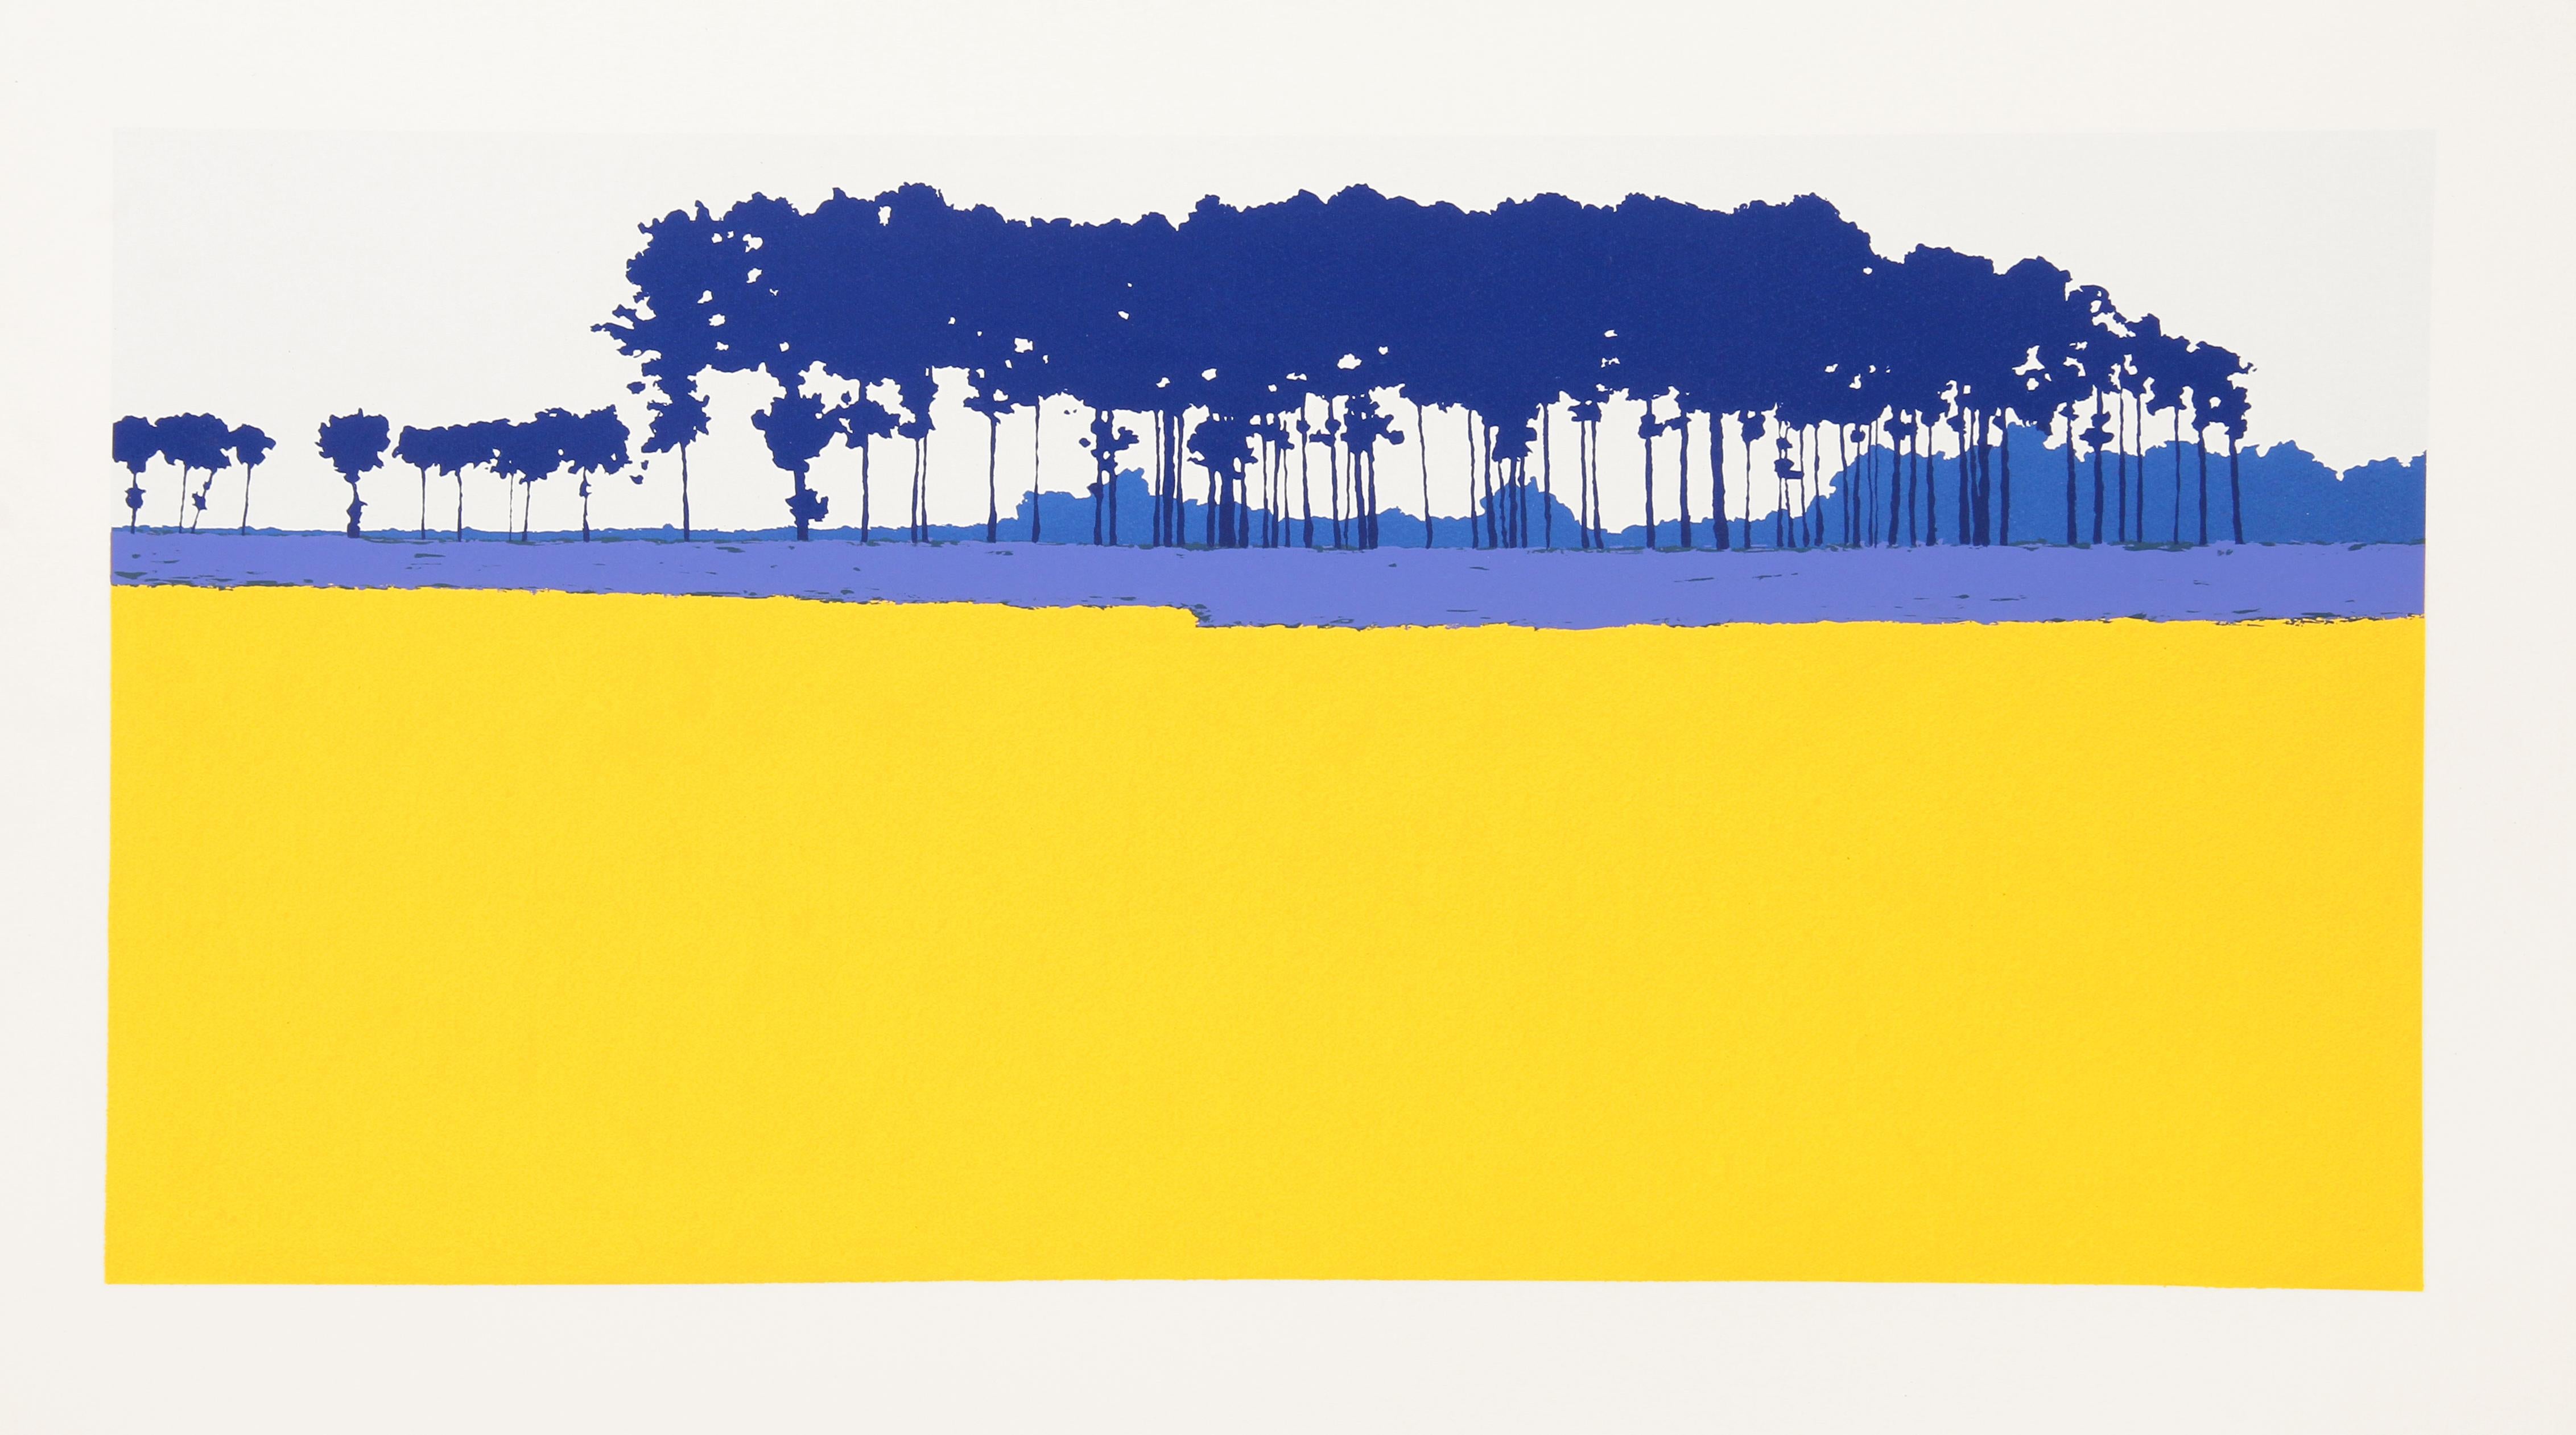 Peupliers Bleus
Daniel Riberzani, French (1942)
Date: 1979
Screenprint, signed and numbered in pencil
Edition of 300, AP 45
Image Size: 15.5 x 31 inches
Size: 20 in. x 35 in. (50.8 cm x 88.9 cm)